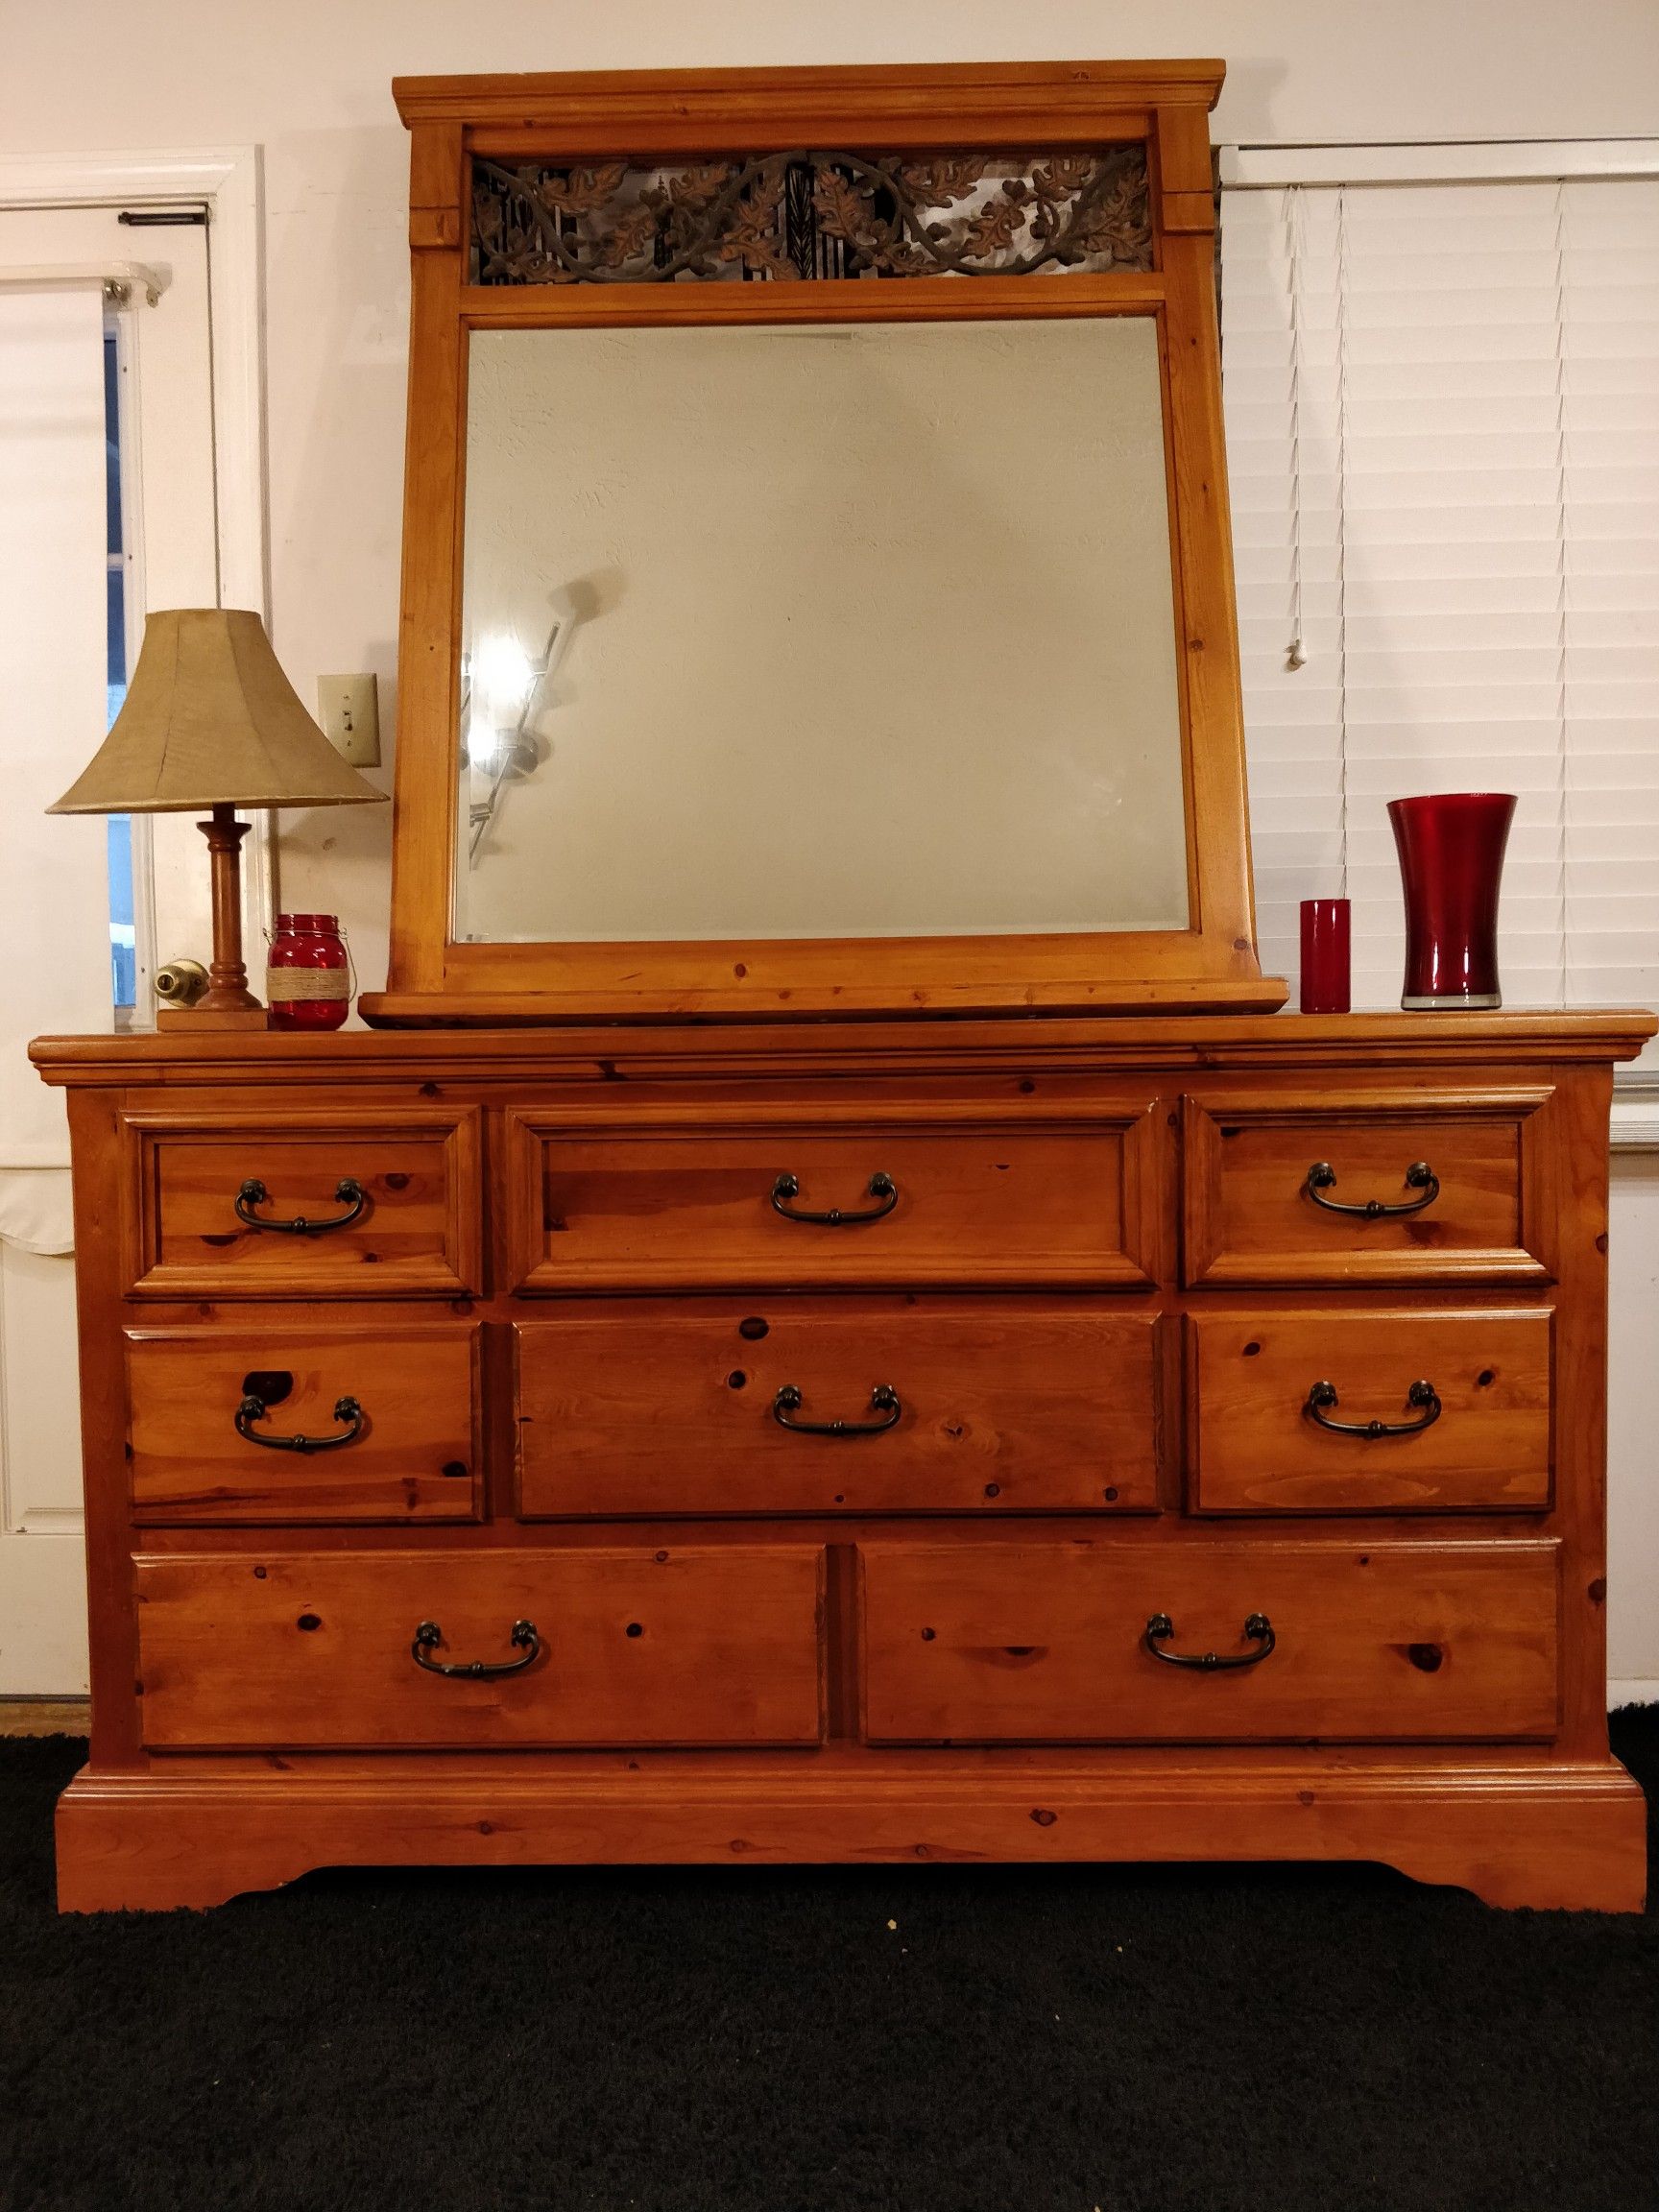 Nice wooden big dresser with mirror and 8 drawers in good condition. L66"*W18.3"*H37.5"